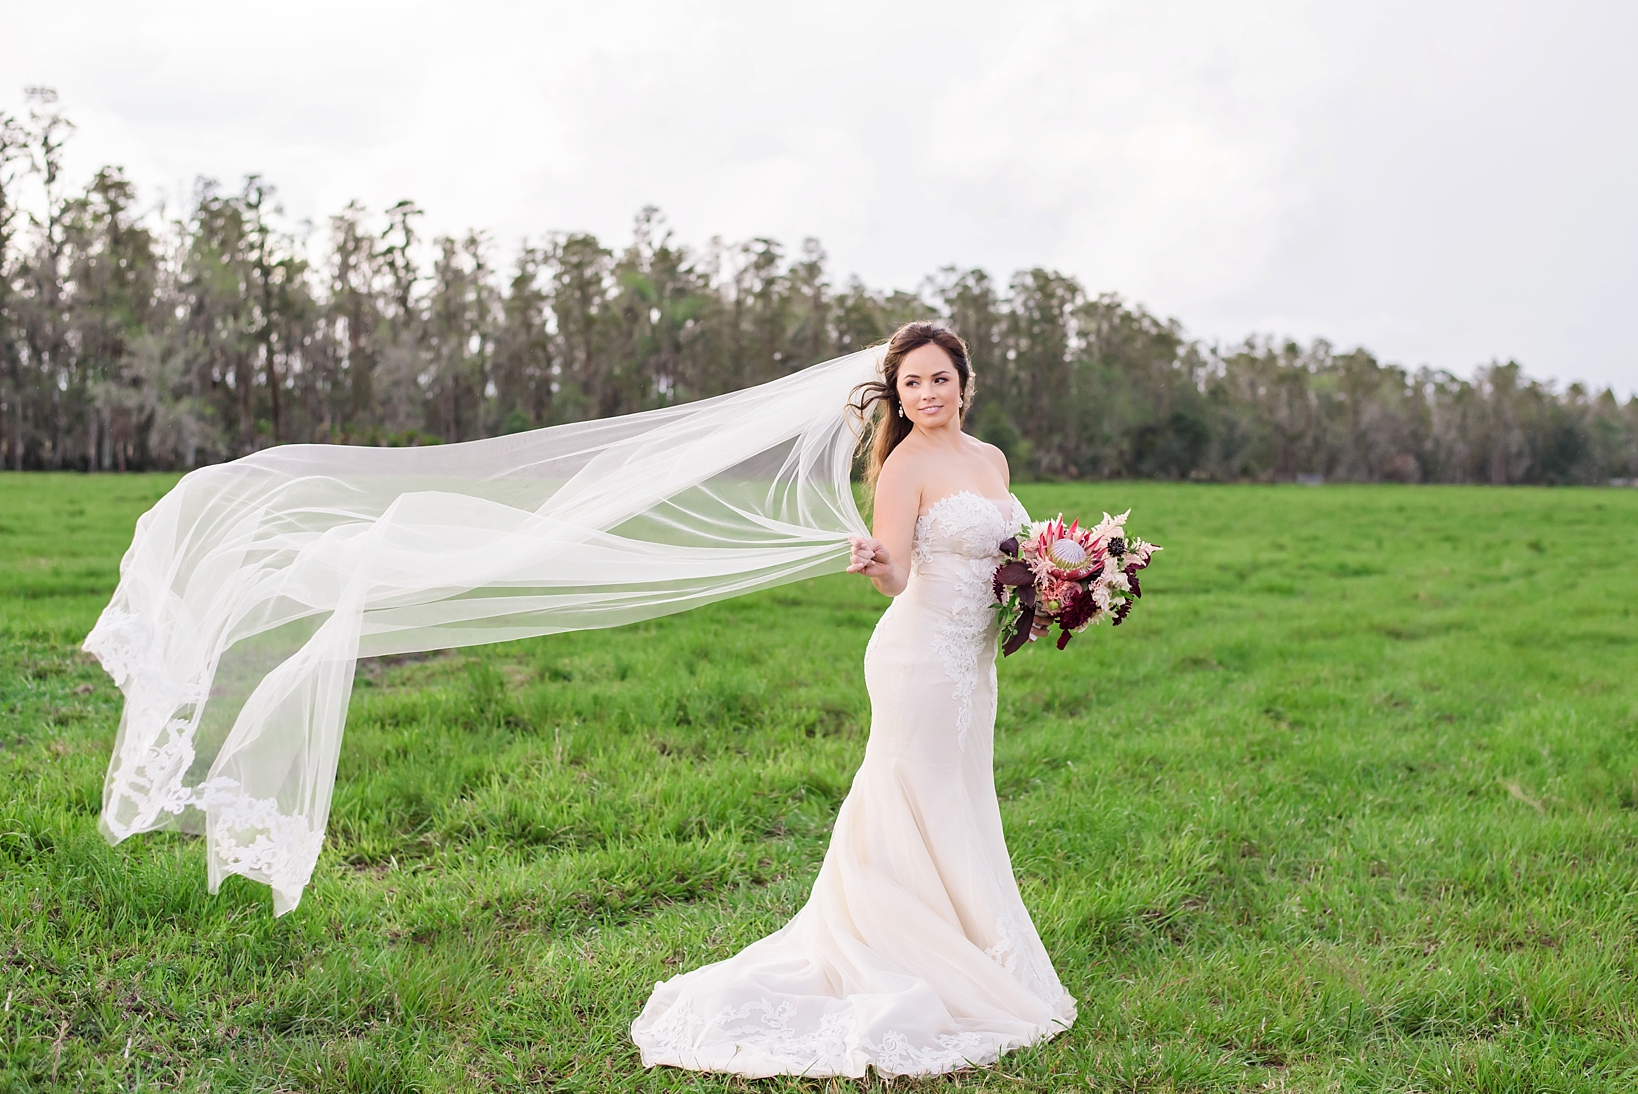 Bride with her cathedral veil blowing in the wind